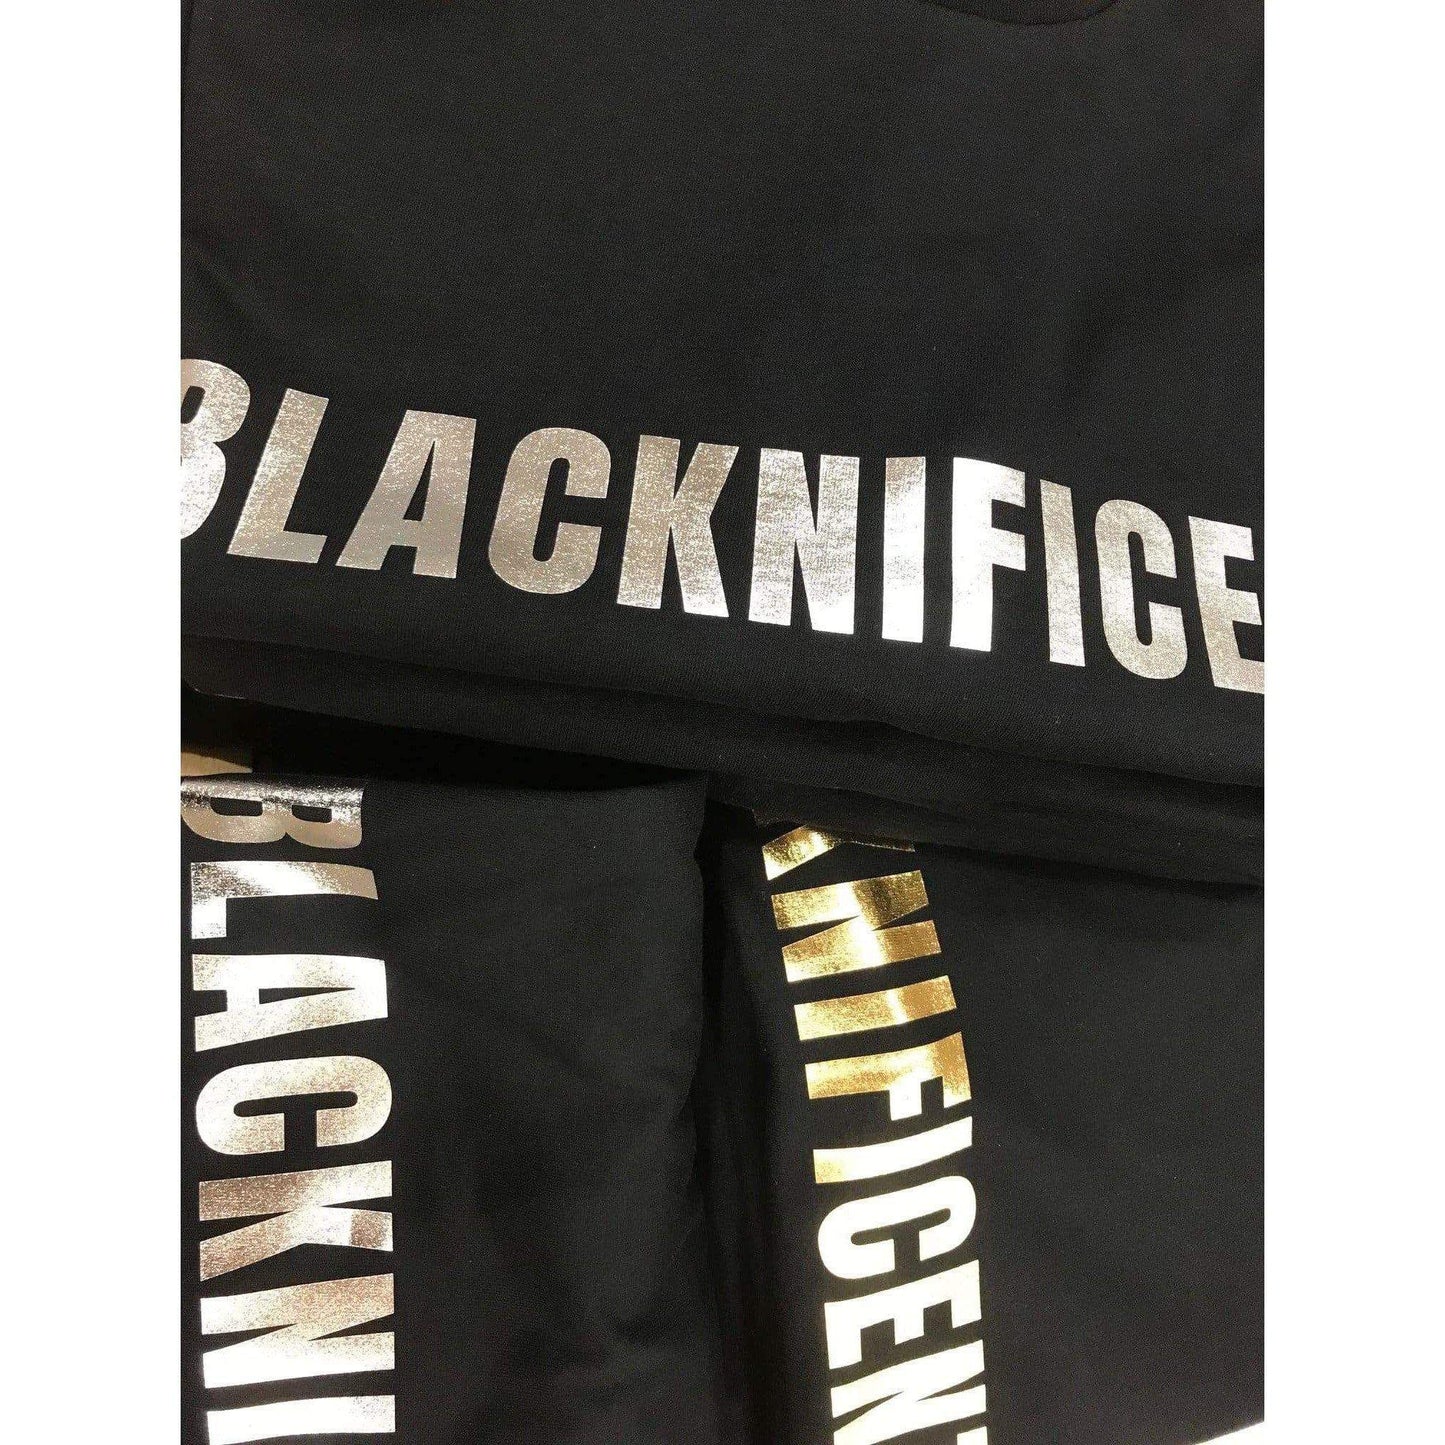 Blacknificent  Printed Tee Blacknificent Tee with Metallic Gold or Silver Print